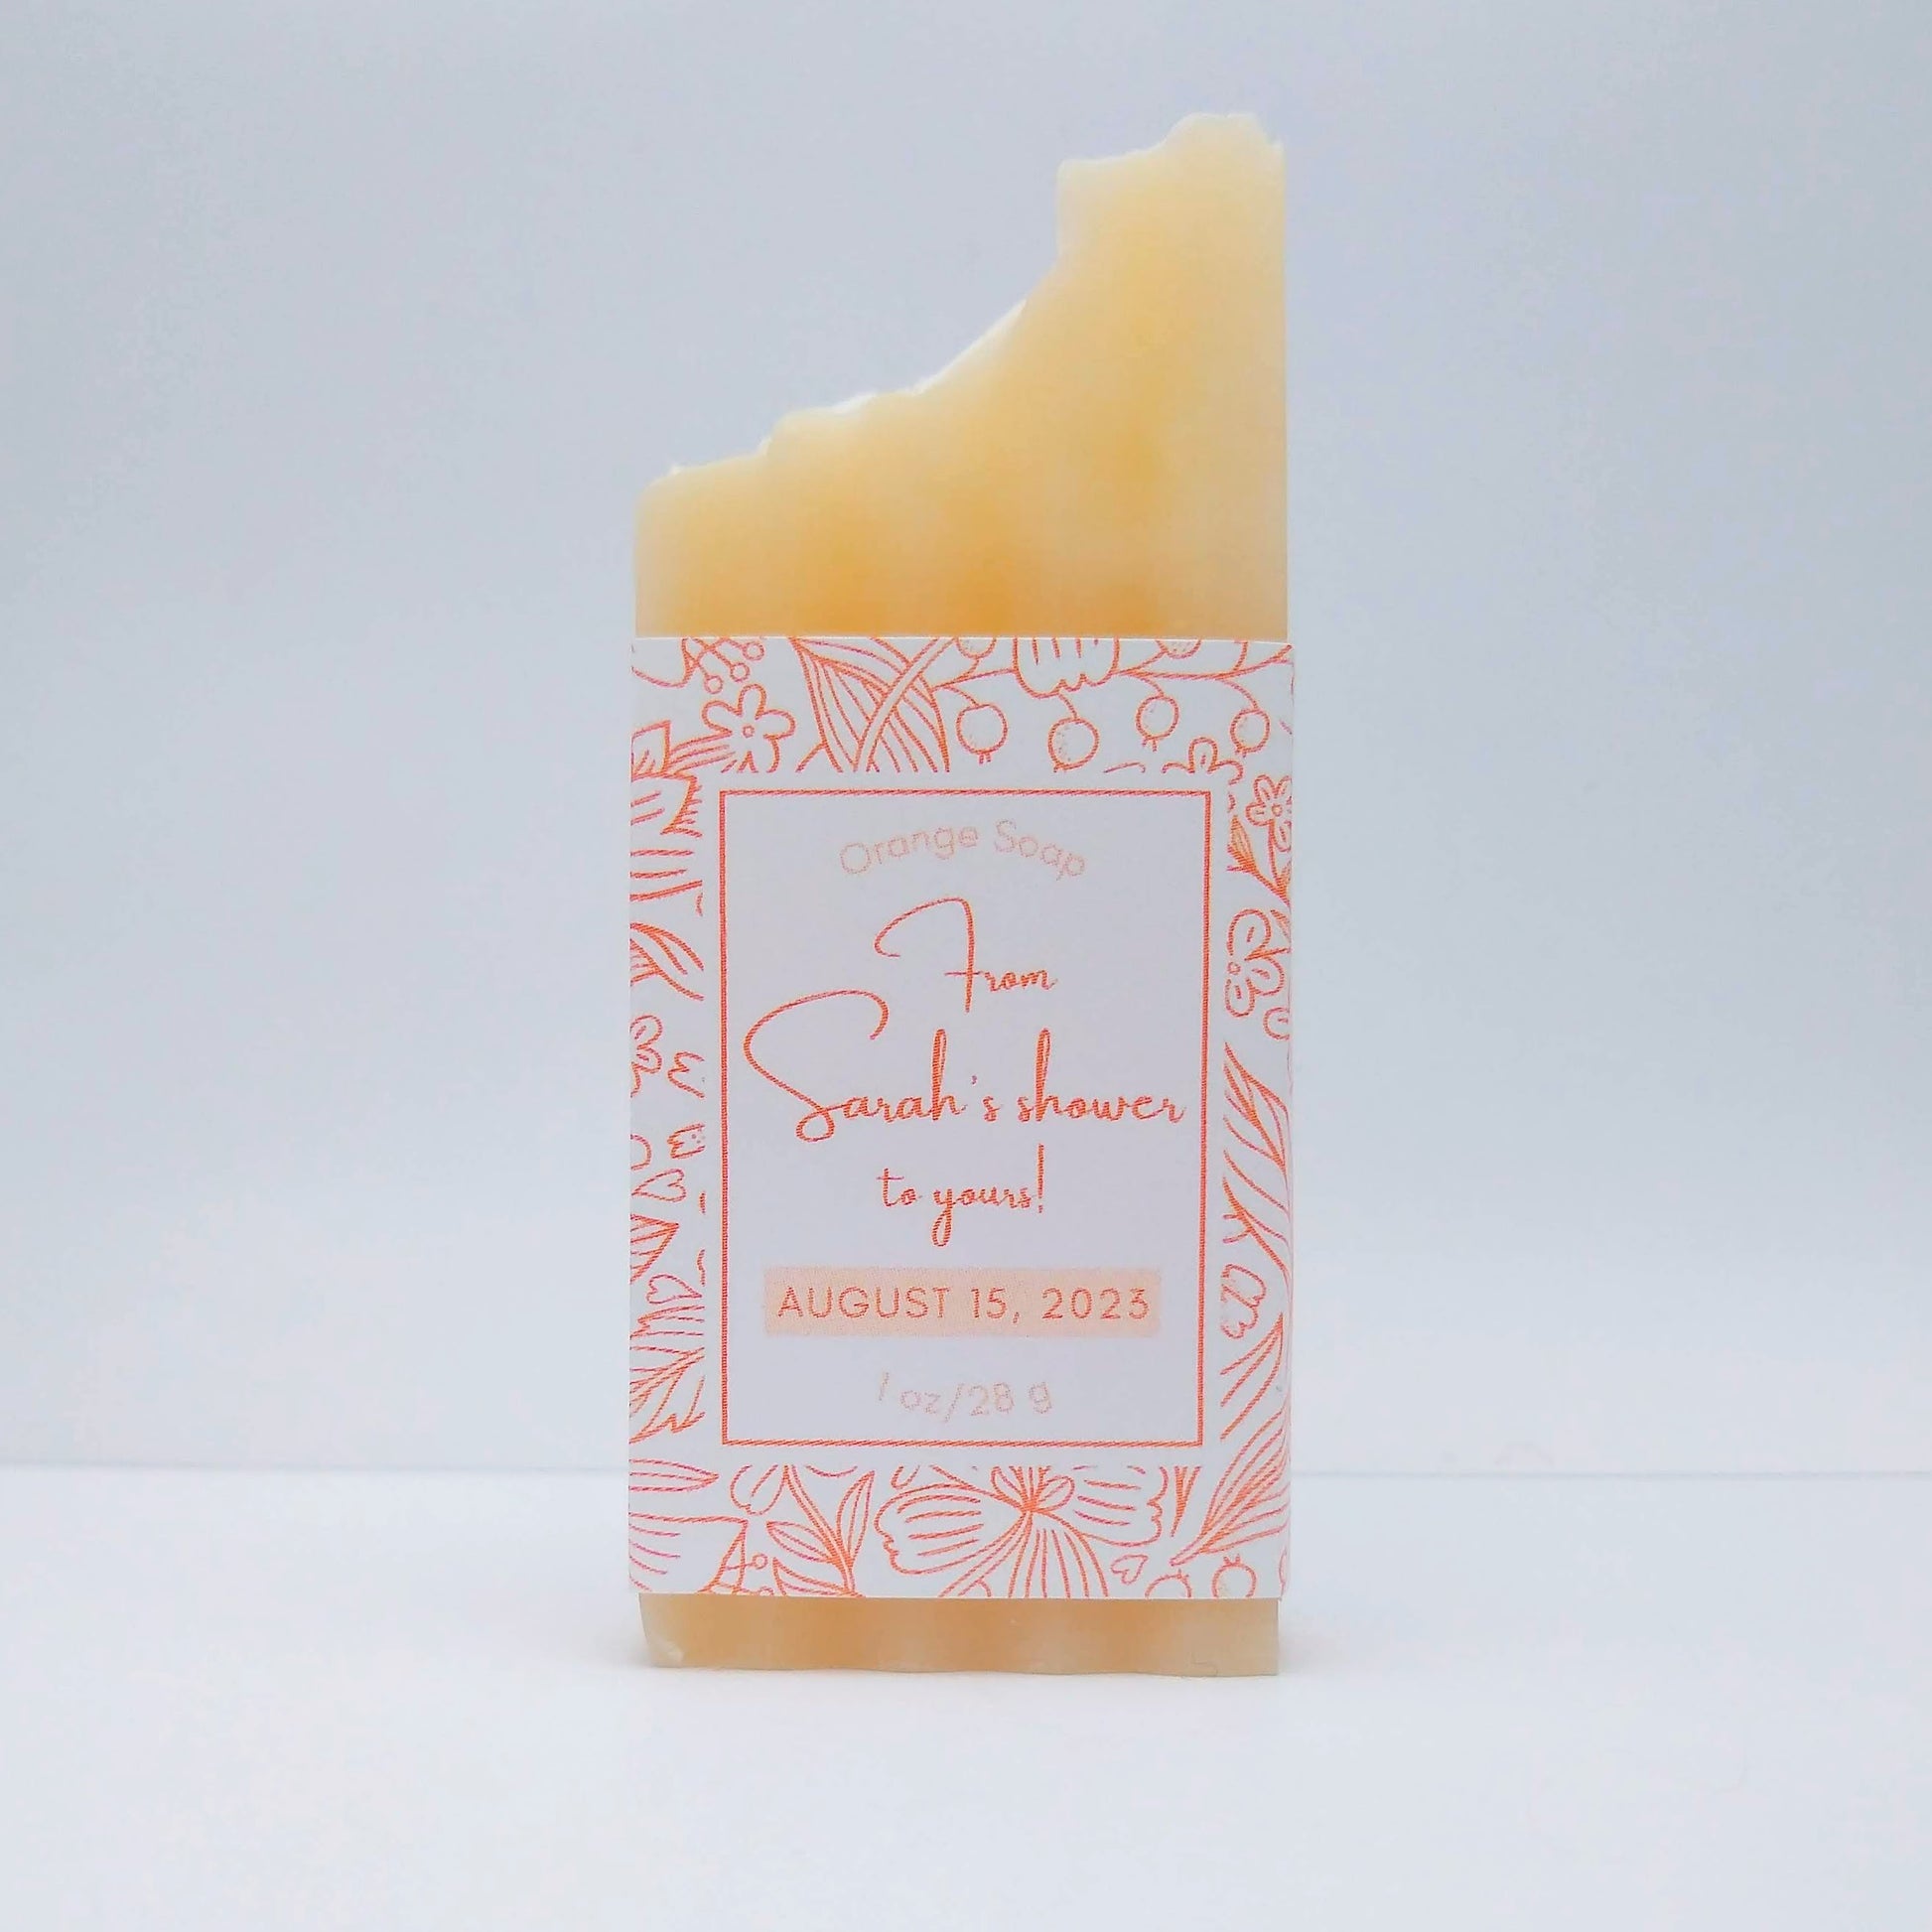 A mini bar of cream-colored soap with a light orange label printed with From Sarah's shower to yours!, August 15, 2023.